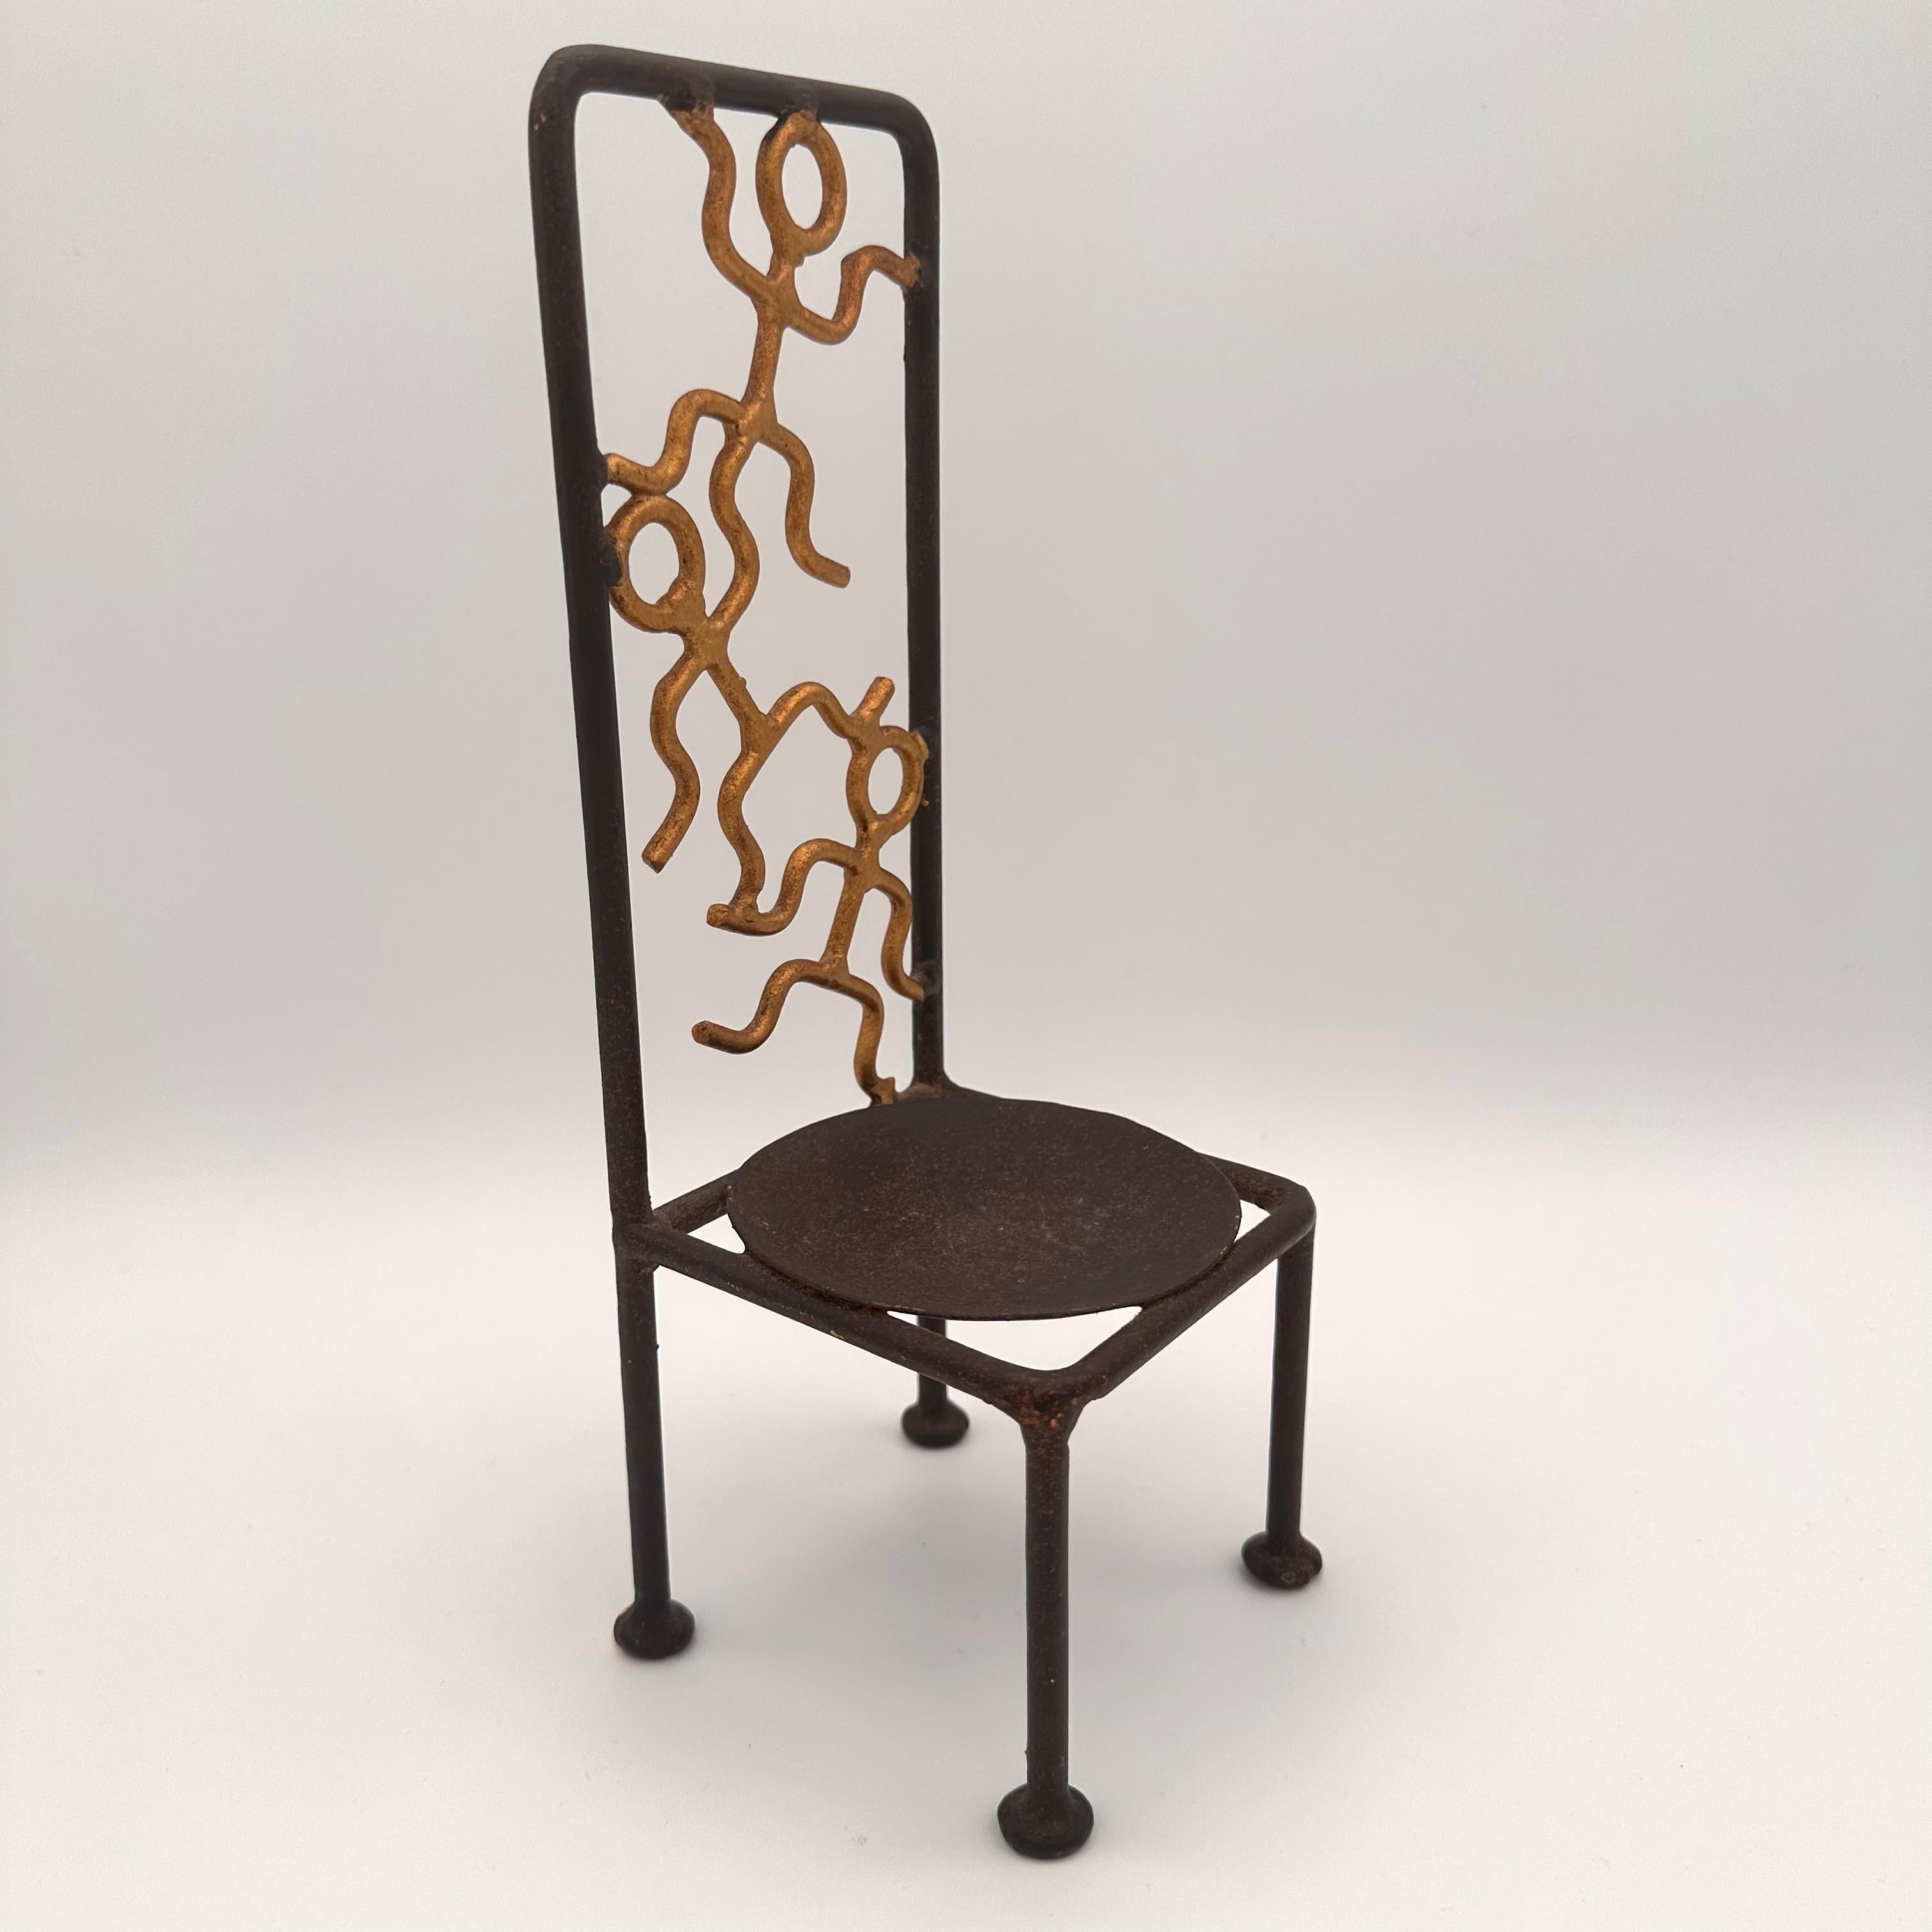 Vintage Handmade Miniature Metal Chair with Stick Figure Person Motif In Good Condition For Sale In Amityville, NY